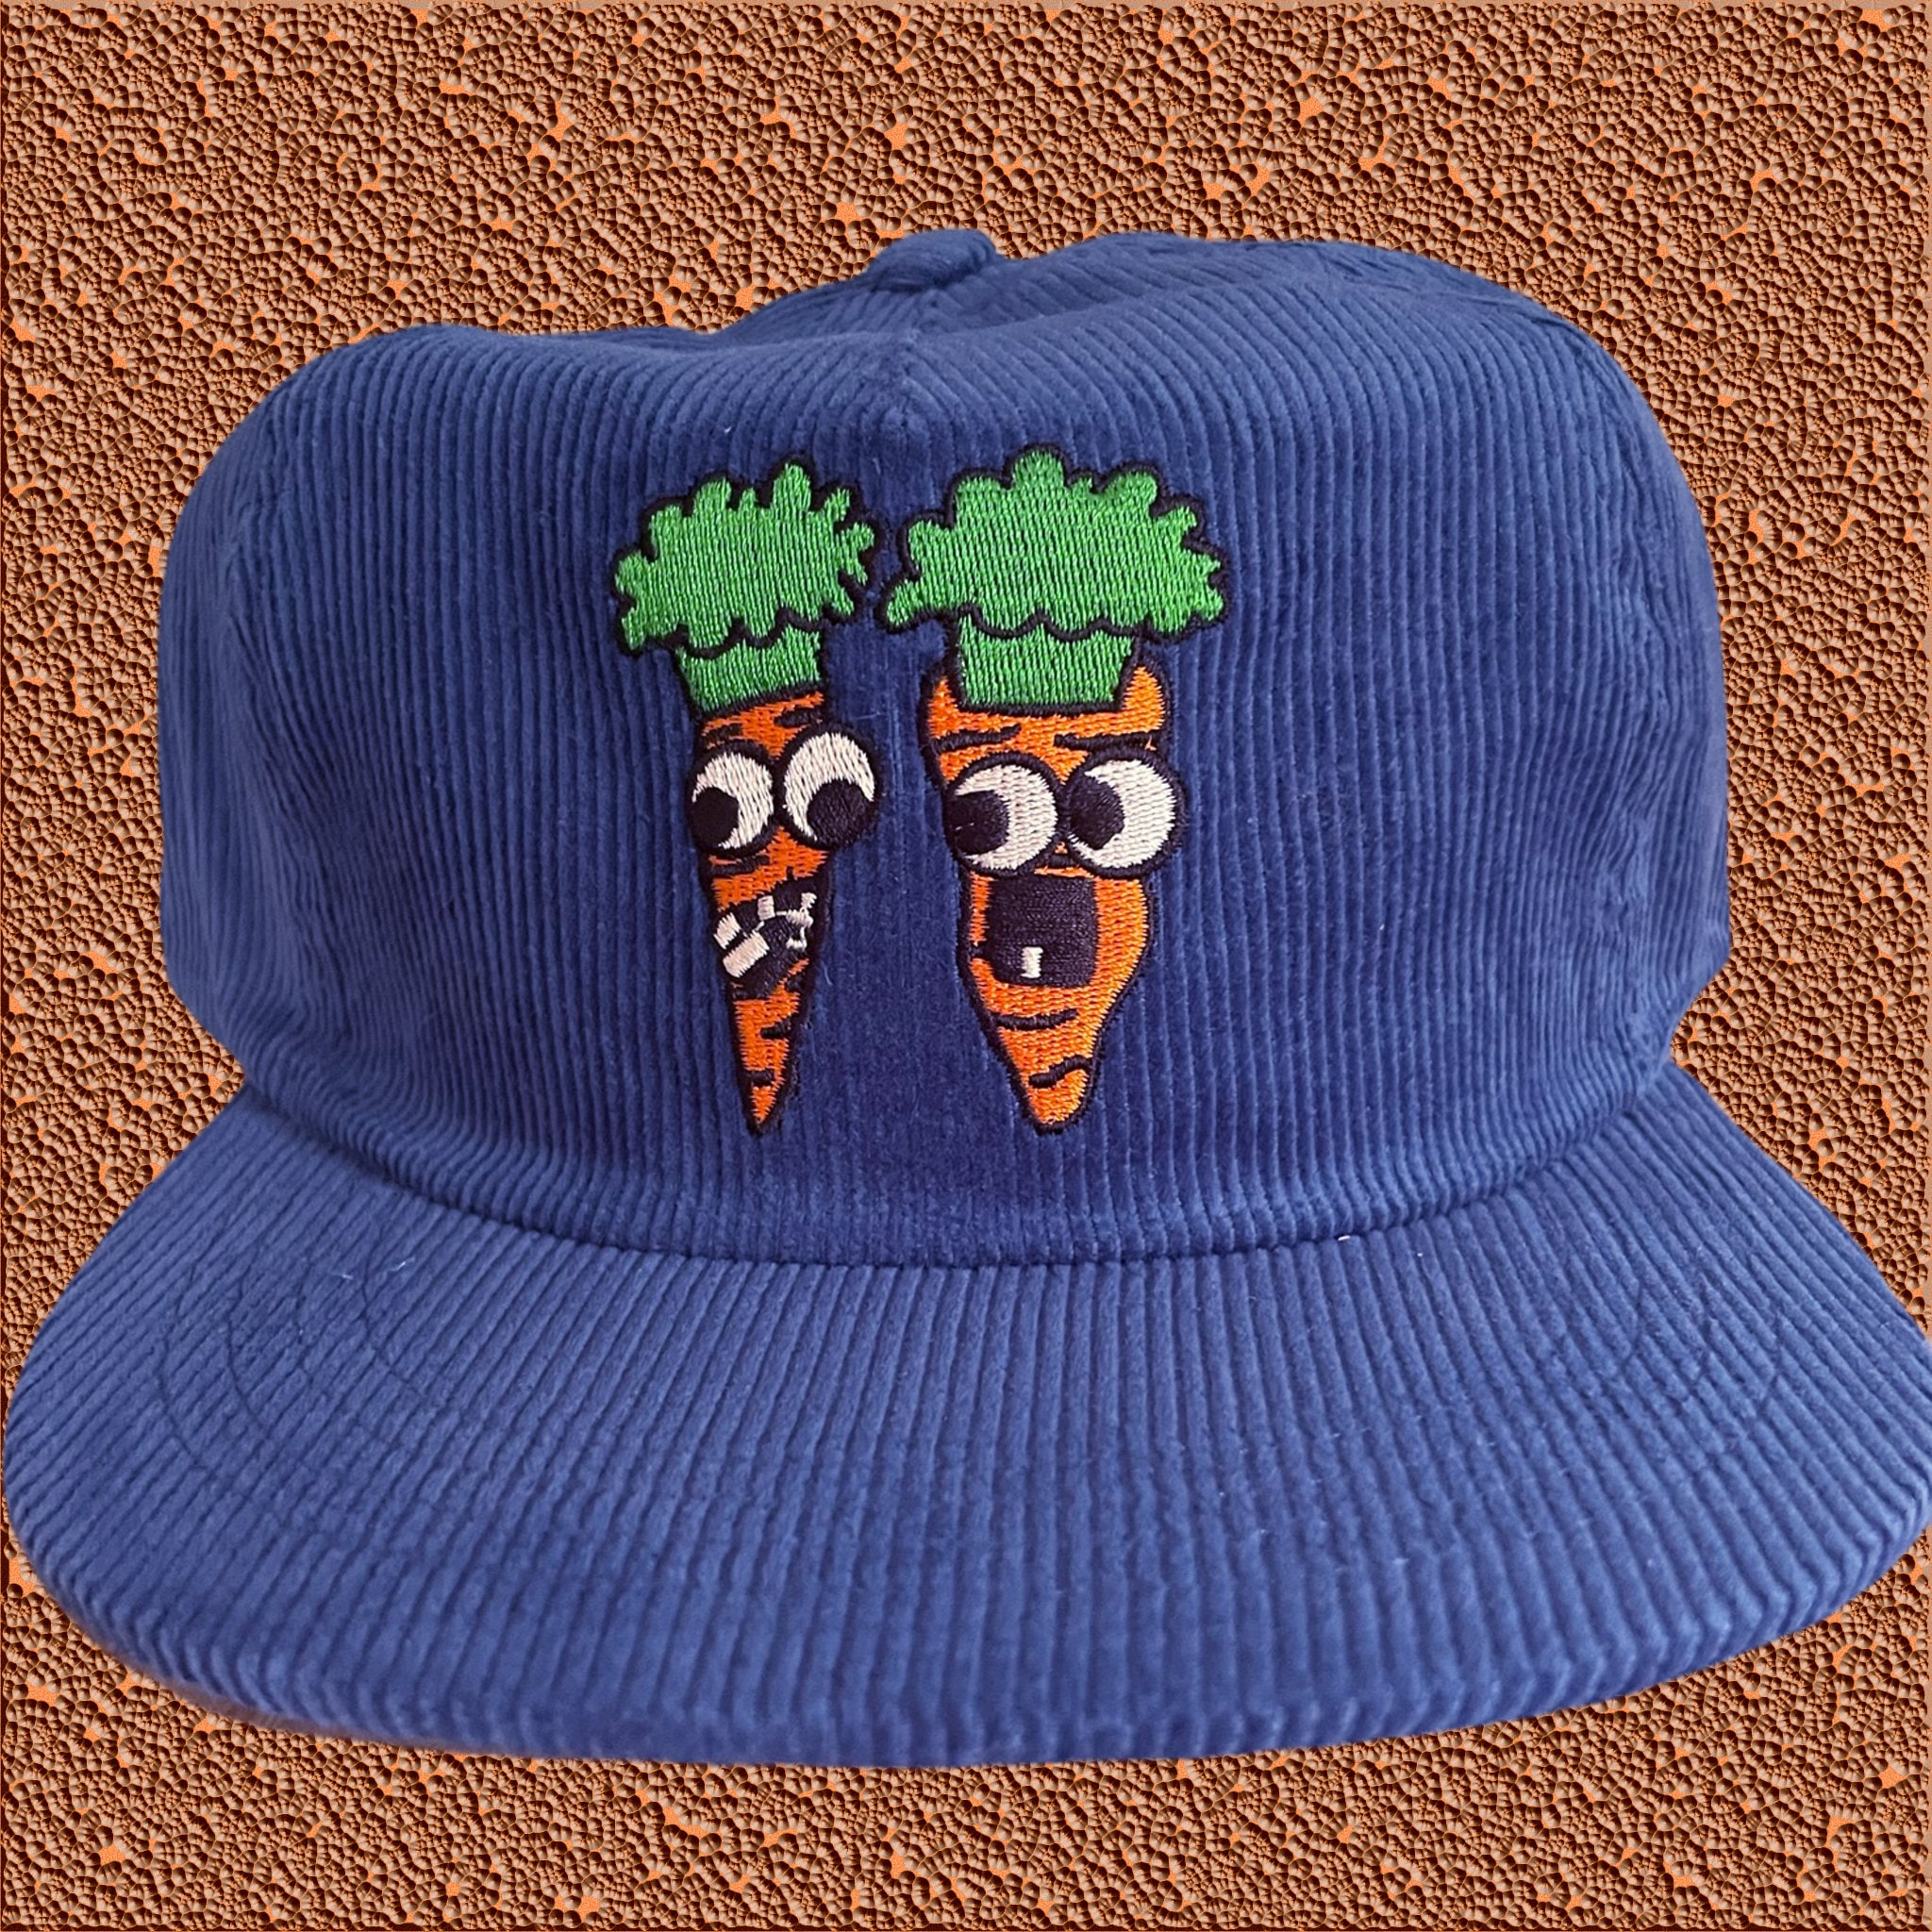 Corduroy Snap Back Hat Carrot Palz Embroidered Blue Retro - Etsy